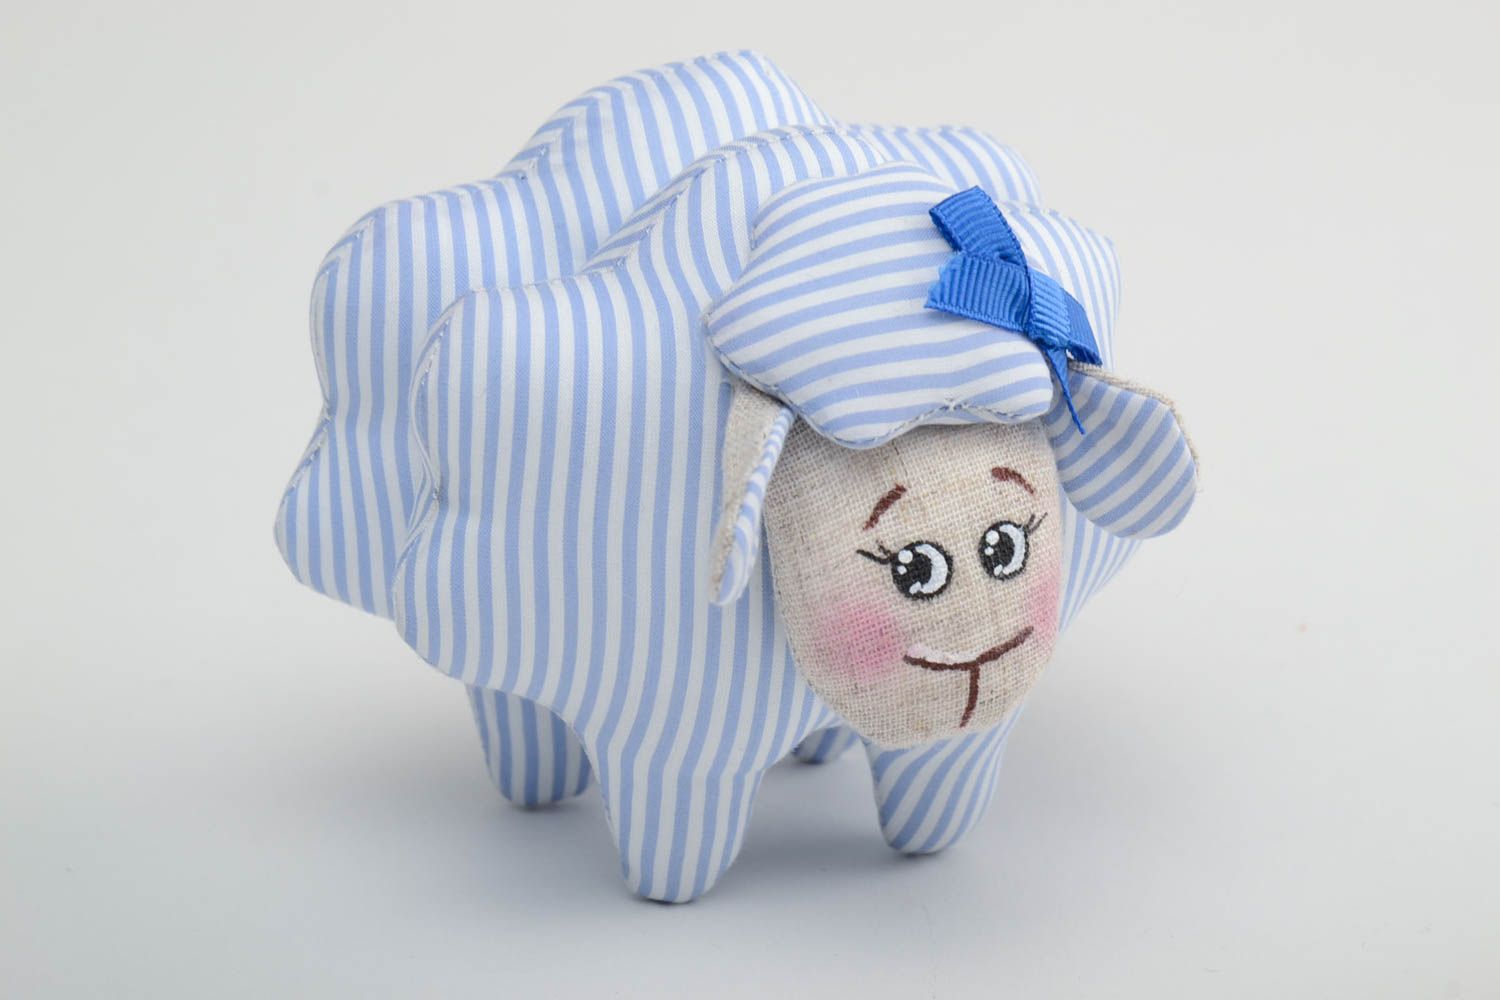 Handmade small soft toy lamb sewn of blue and white striped linen fabric photo 2